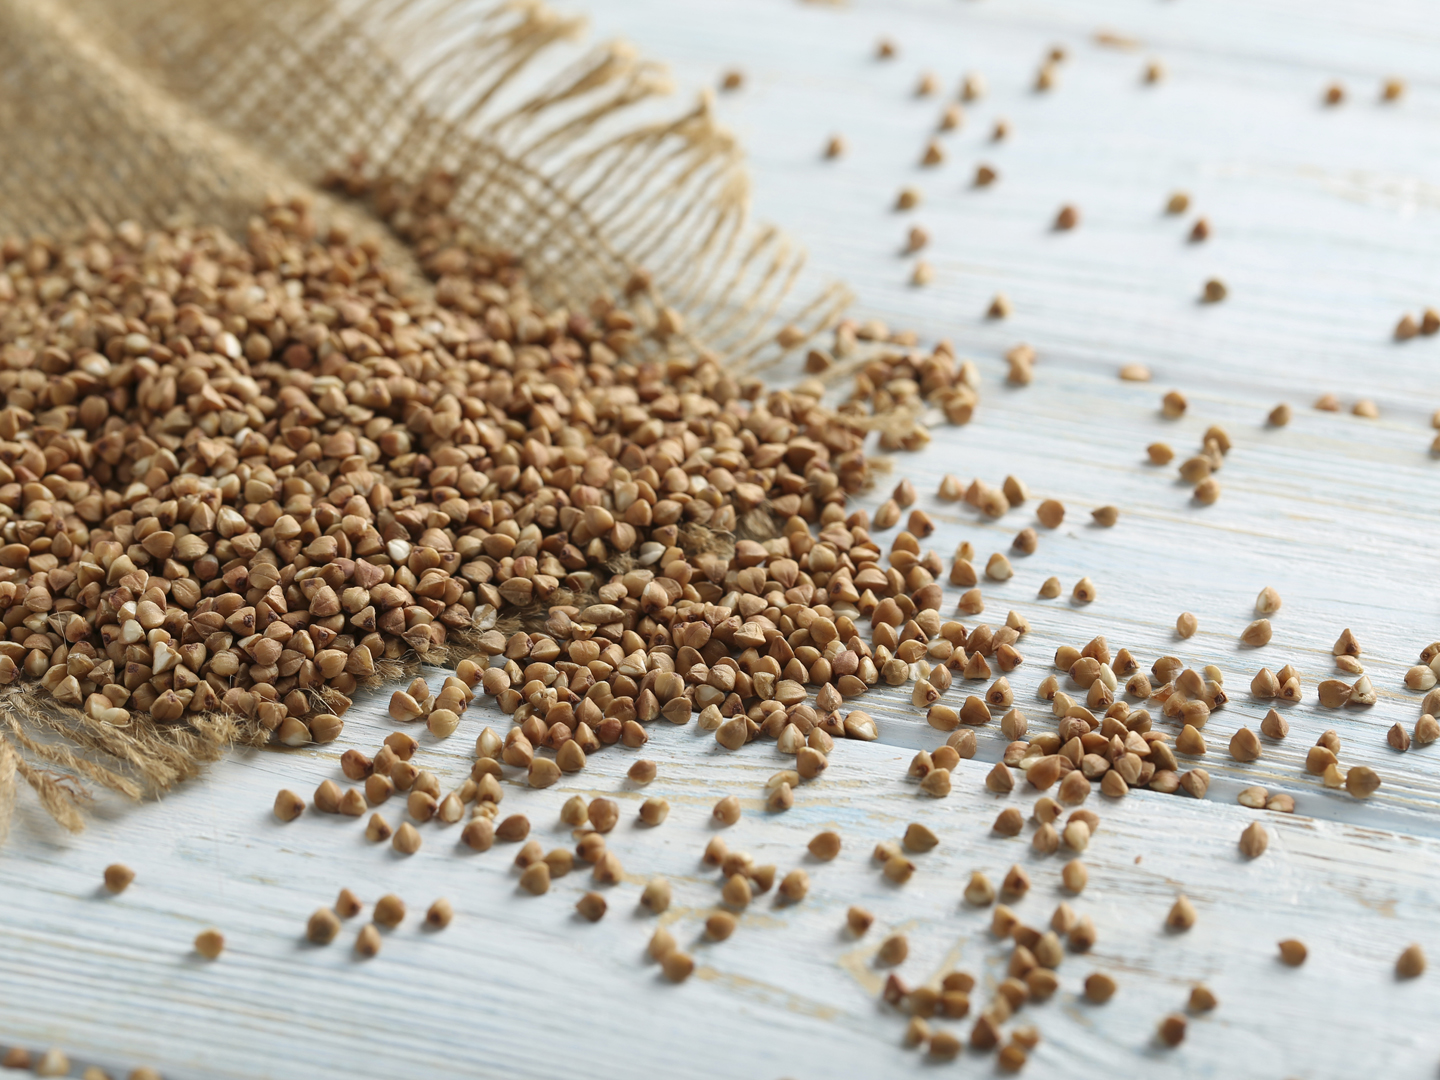 Cooking With Grains: Buckwheat, Kasha - Dr. Weil's Healthy Kitchen